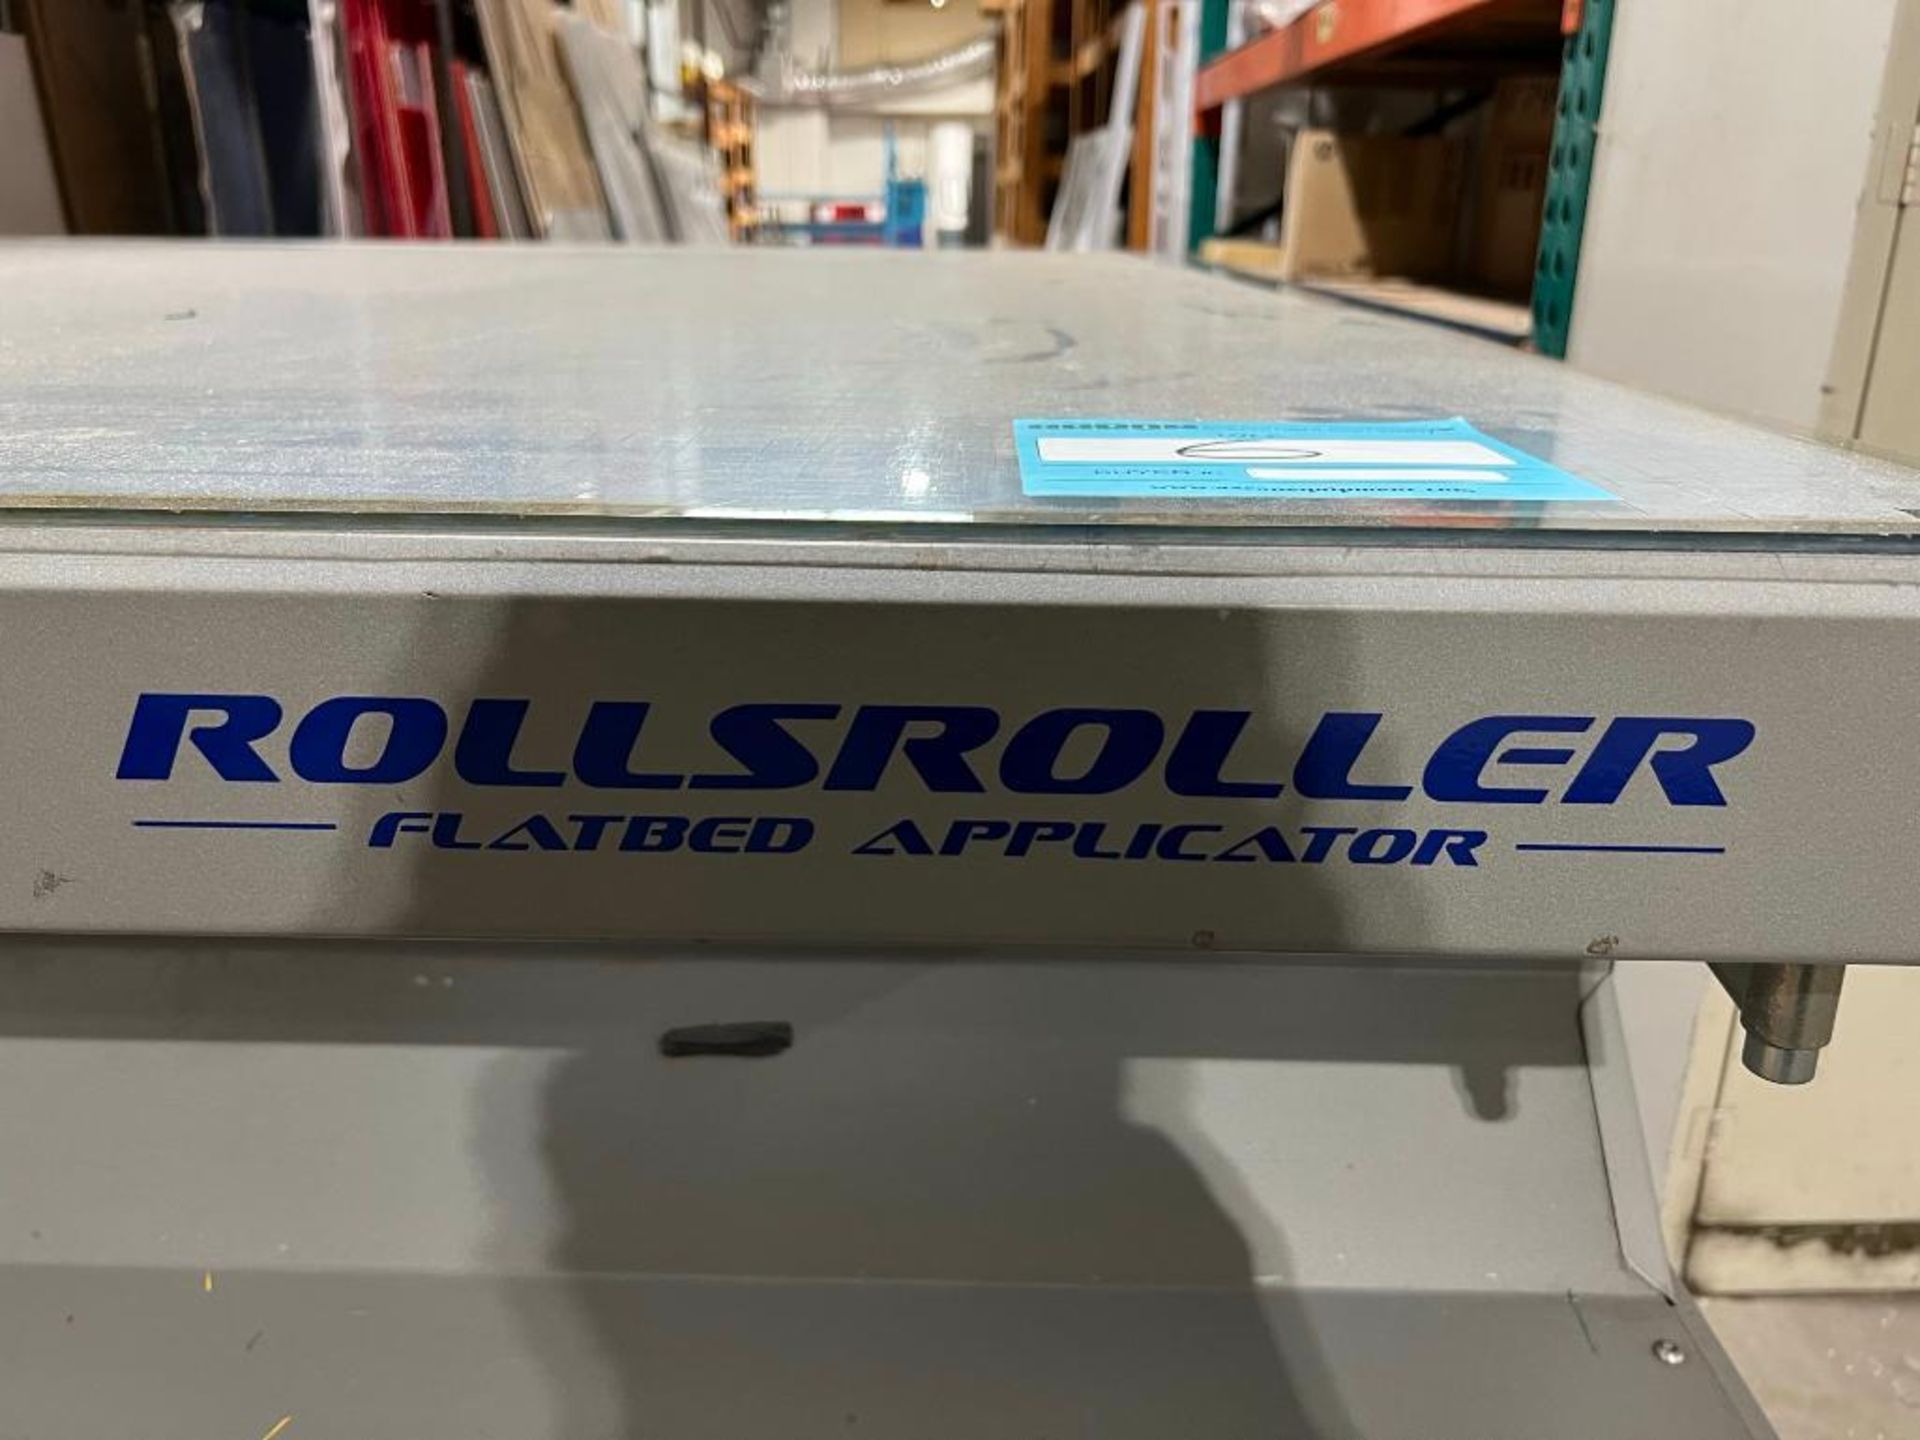 RollsRoller Flatbed Applicator Model Premium 540/220P, S/N 33624-1 (2015), 18' x 7' 3" Table, with K - Image 12 of 20